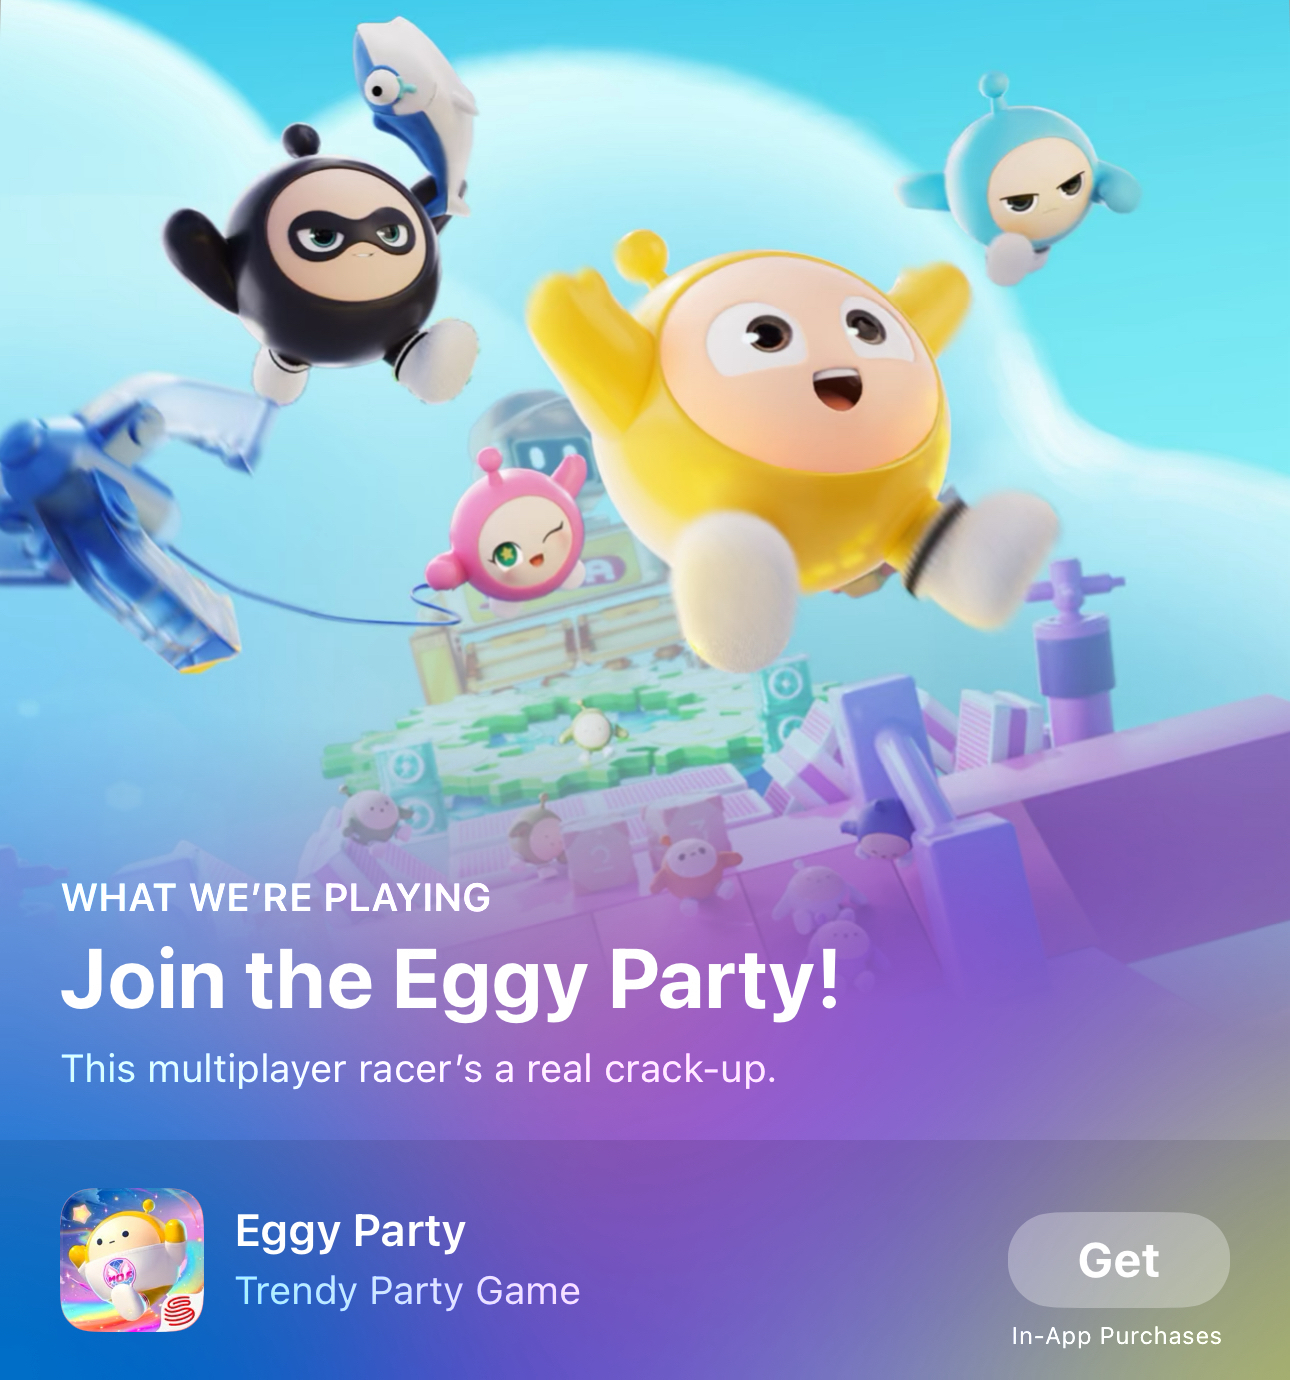 Promotional graphic for “Eggy Party,” a multiplayer racing game app, featuring cartoonish egg characters in various costumes flying through a colorful, game-themed sky. A button labeled “Get” indicates the app is available for download, and text mentions